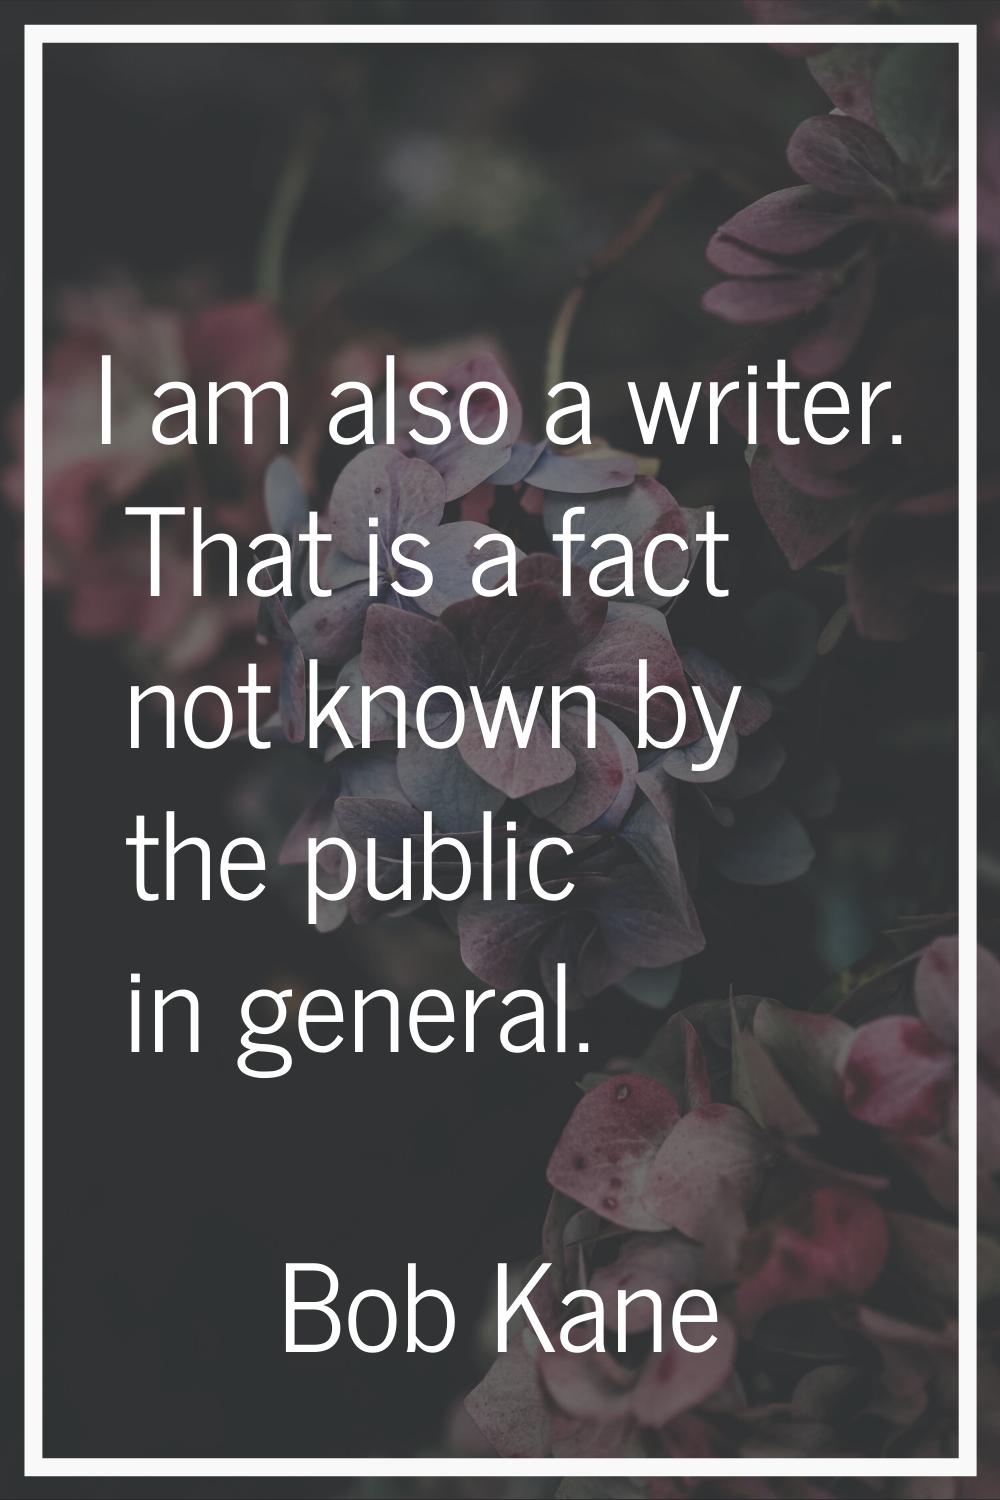 I am also a writer. That is a fact not known by the public in general.